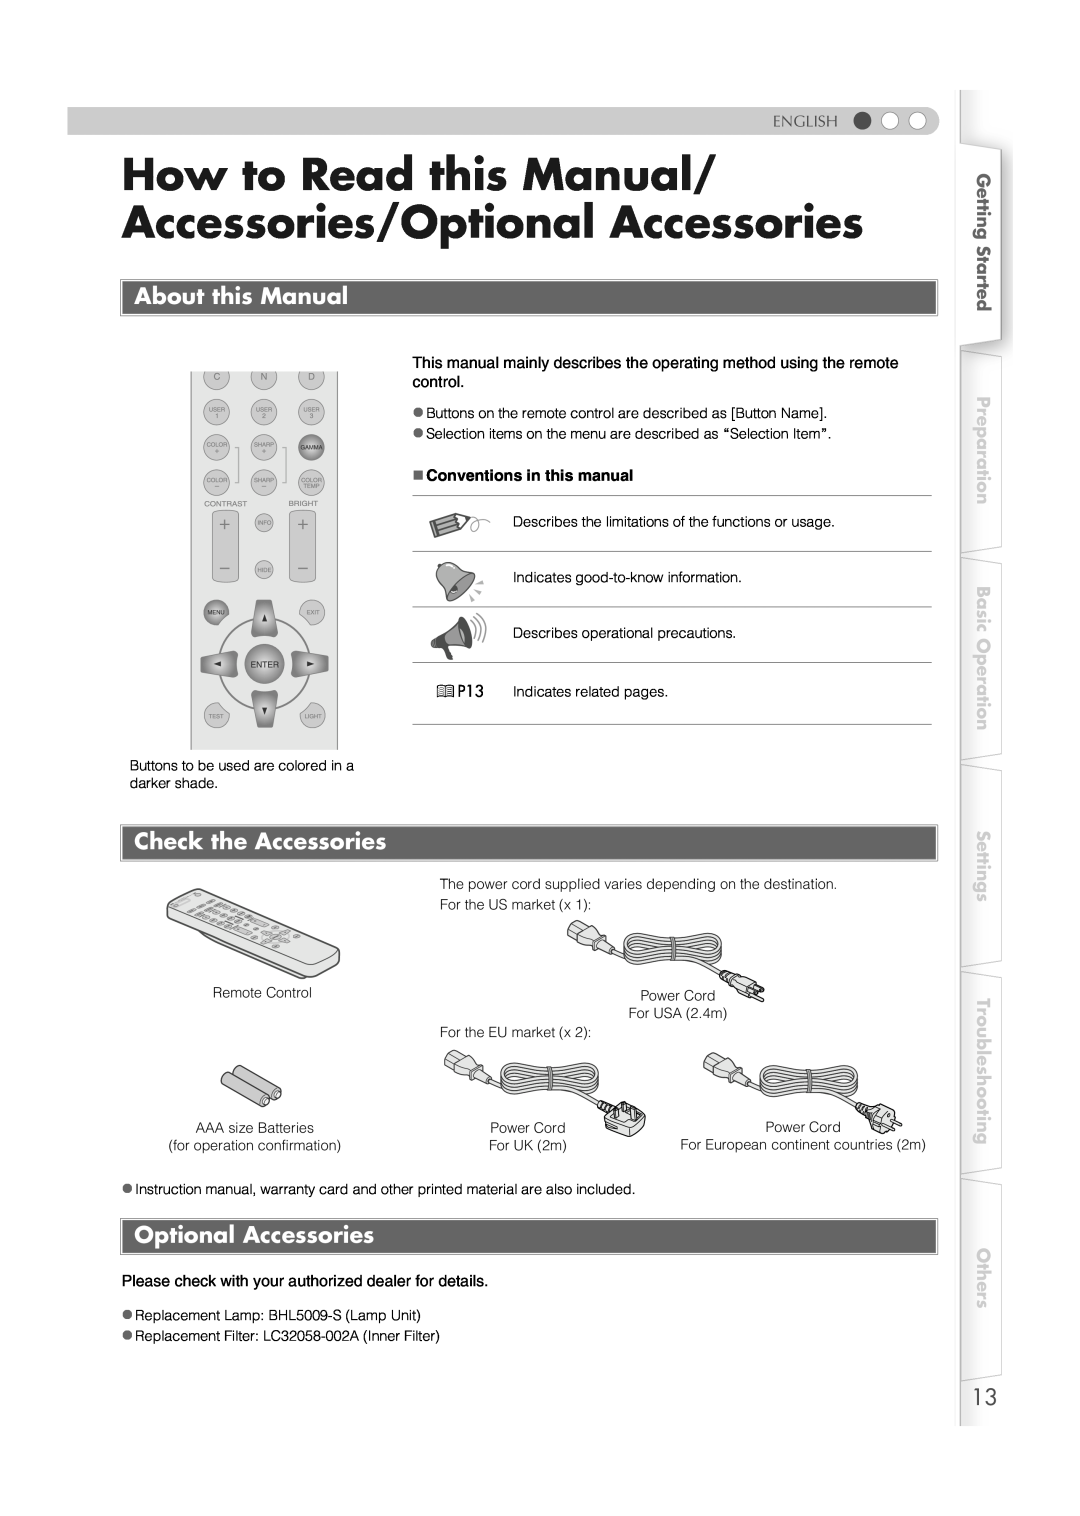 JVC DLA-HD1 How to Read this Manual/ Accessories/Optional Accessories, About this Manual, Check the Accessories, English 